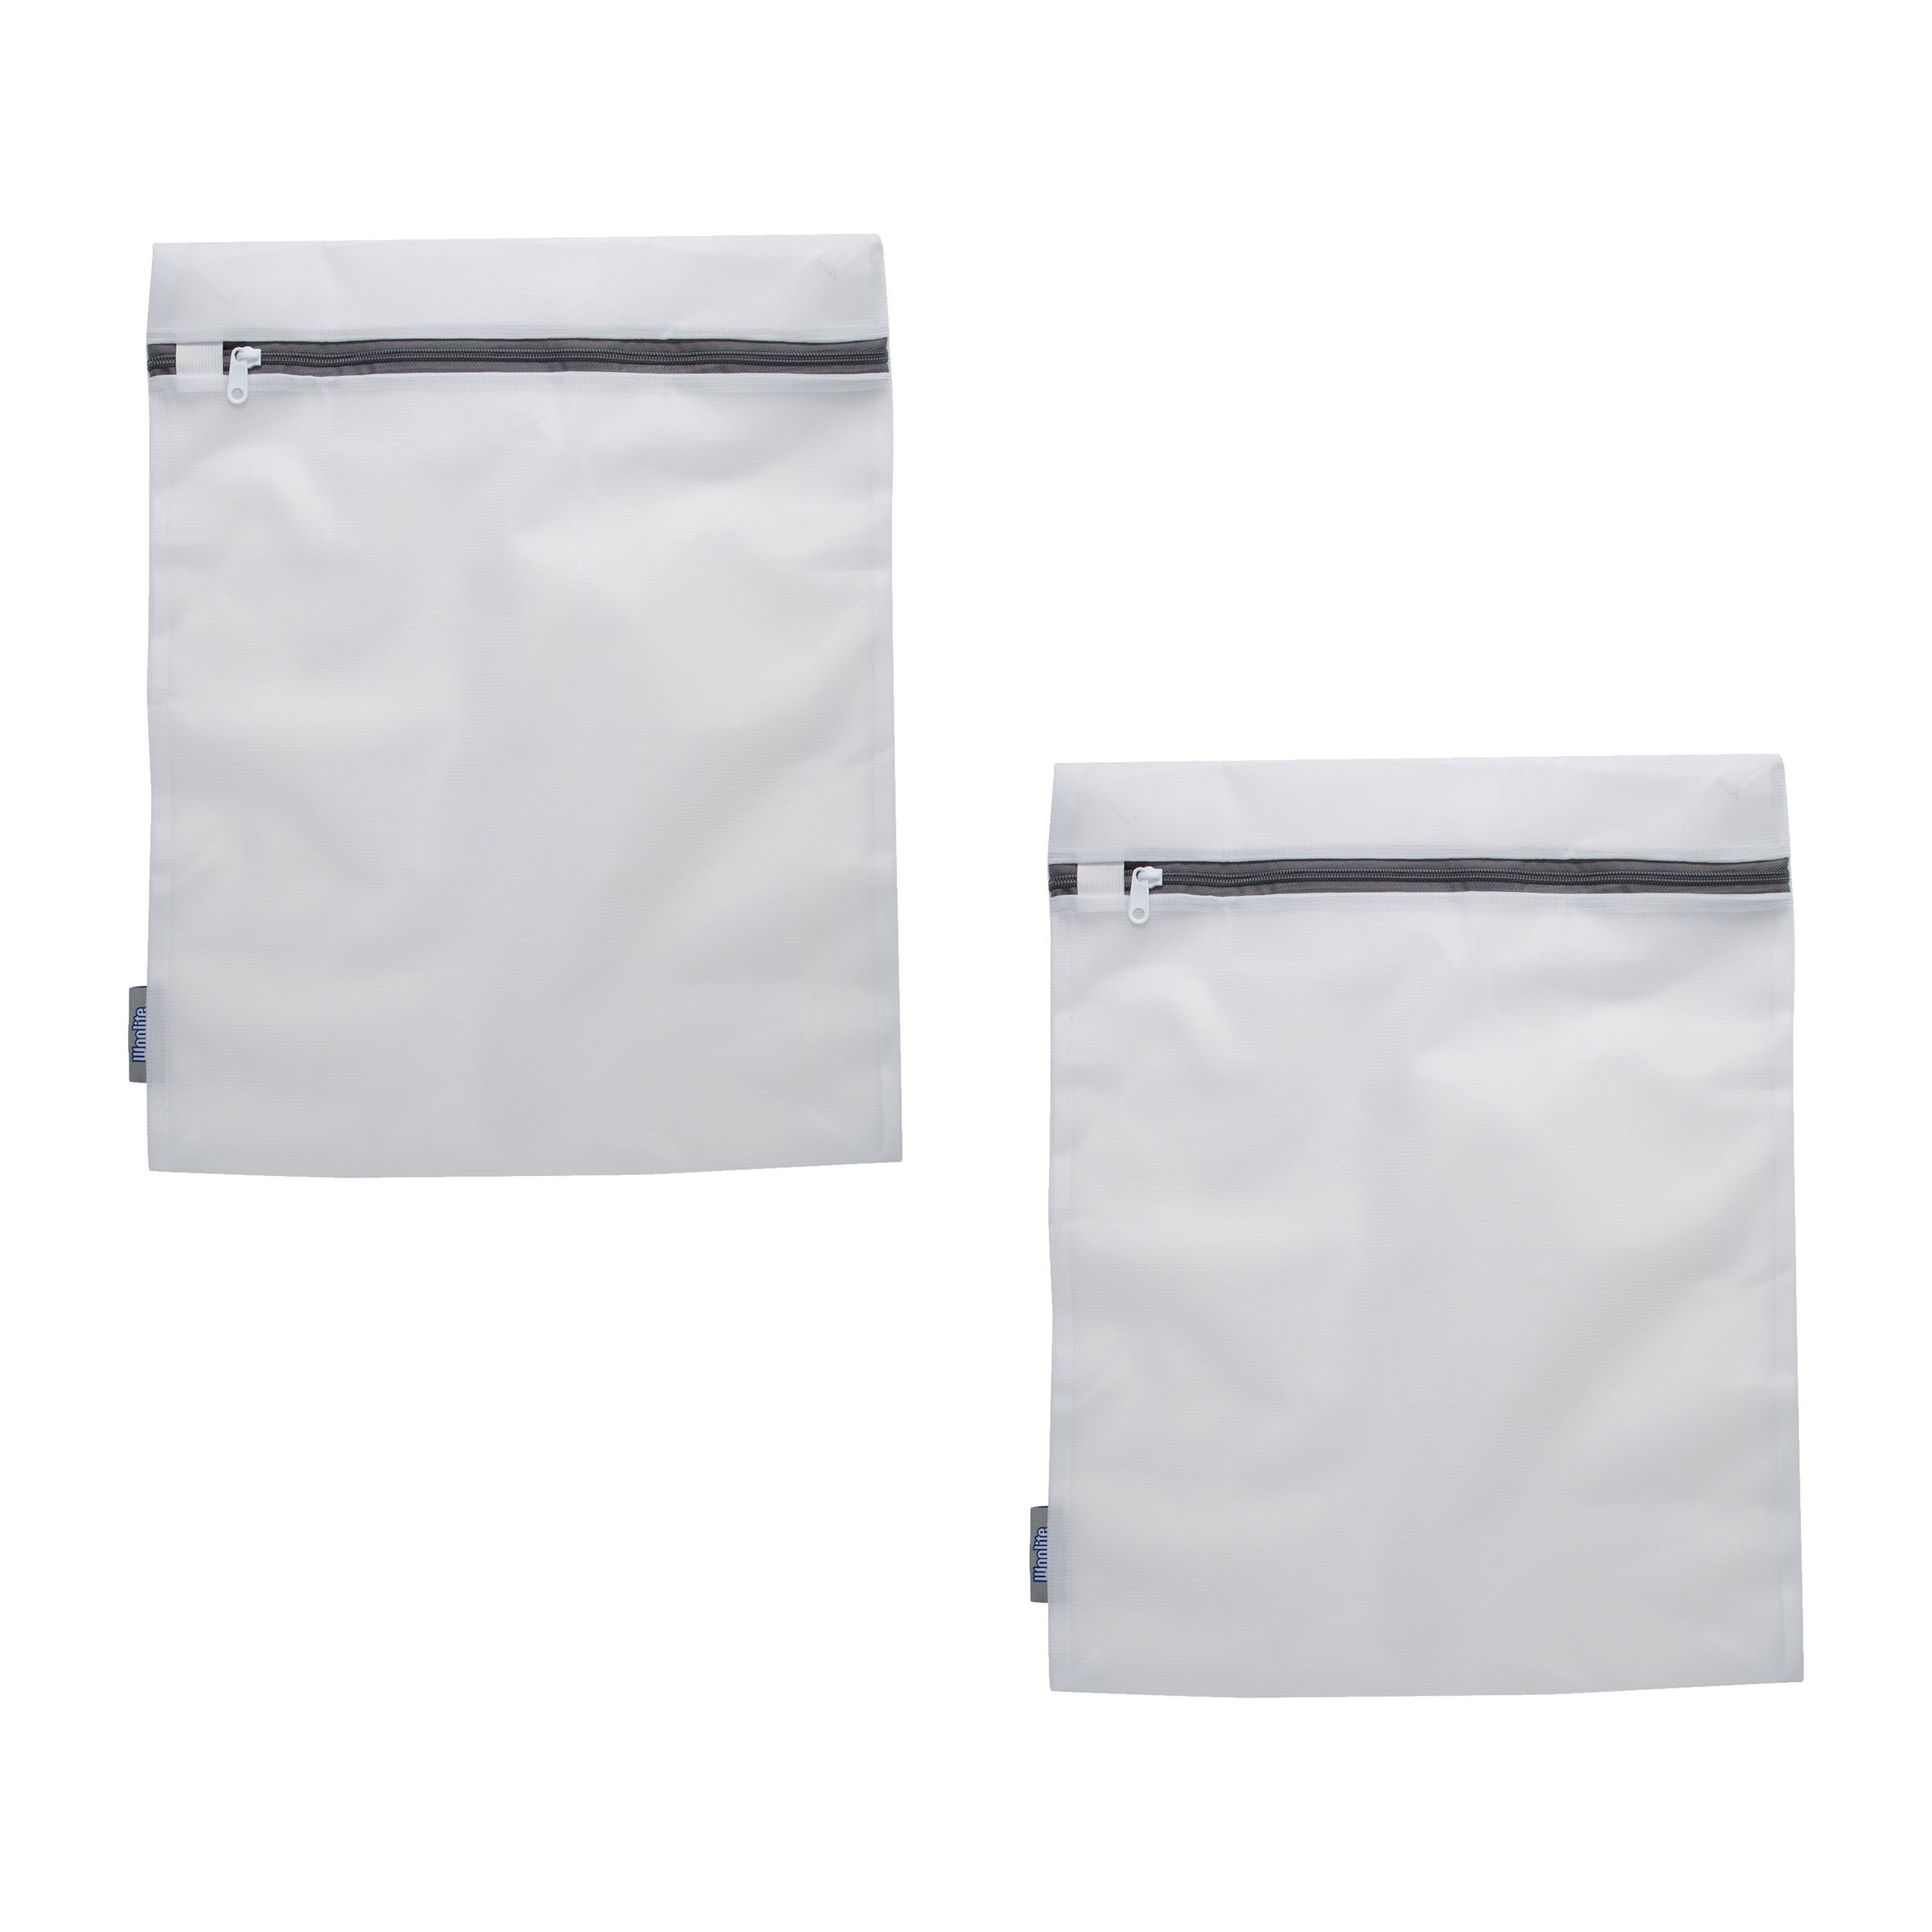 Laundry bags for delicates | Tescoma